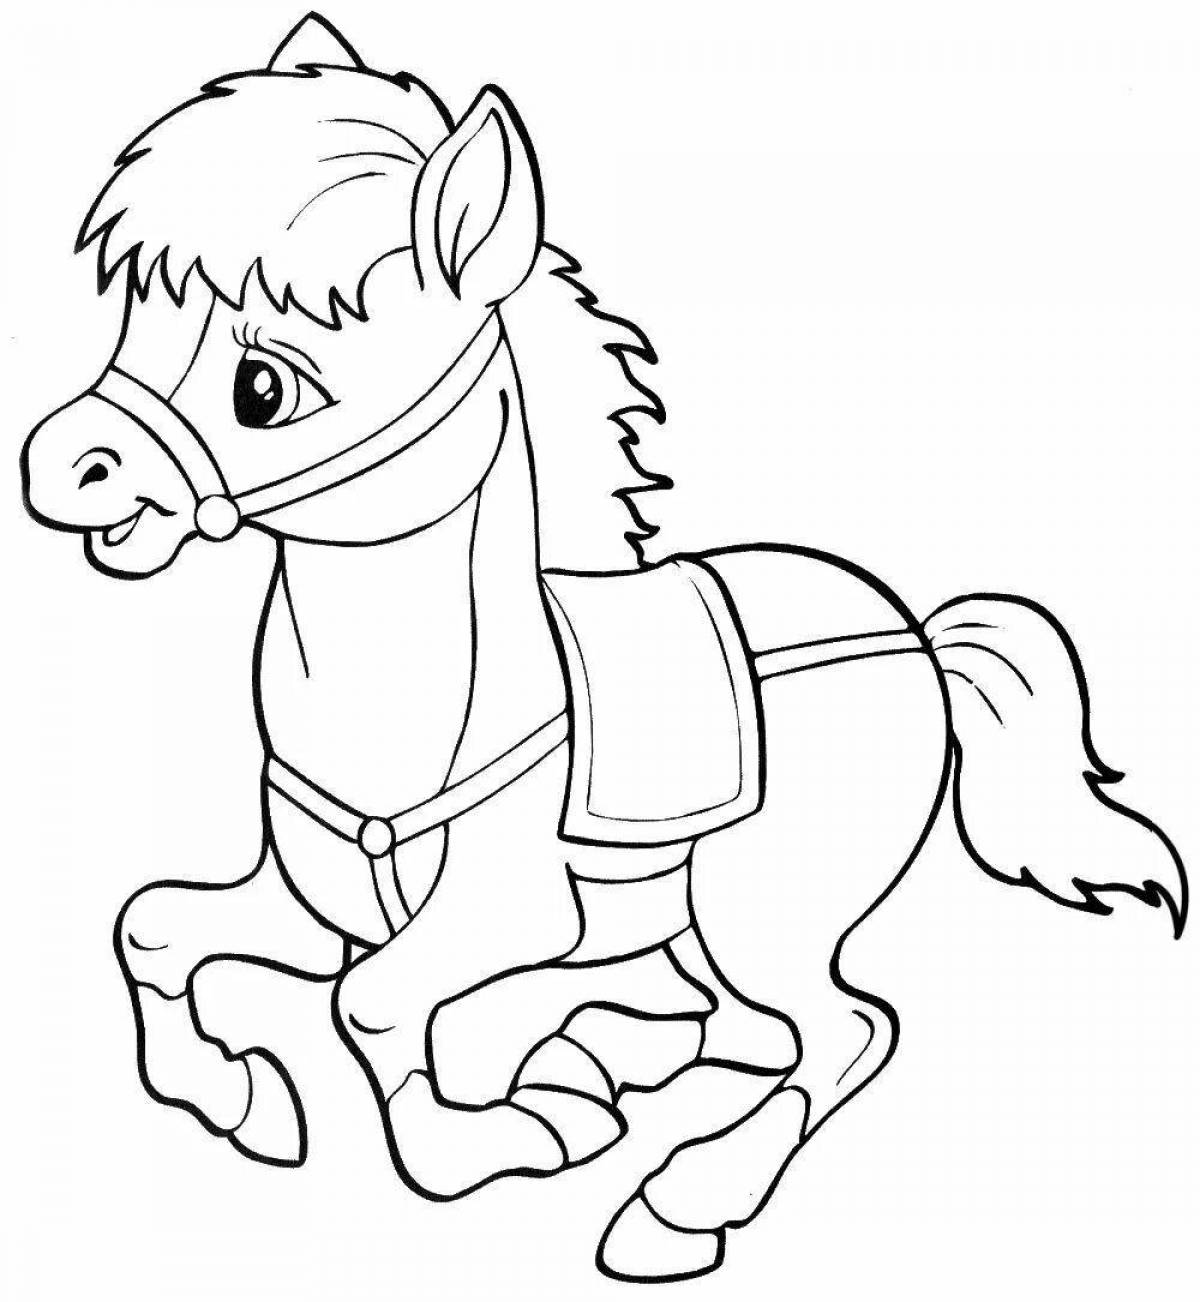 Exotic cartoon horse coloring page